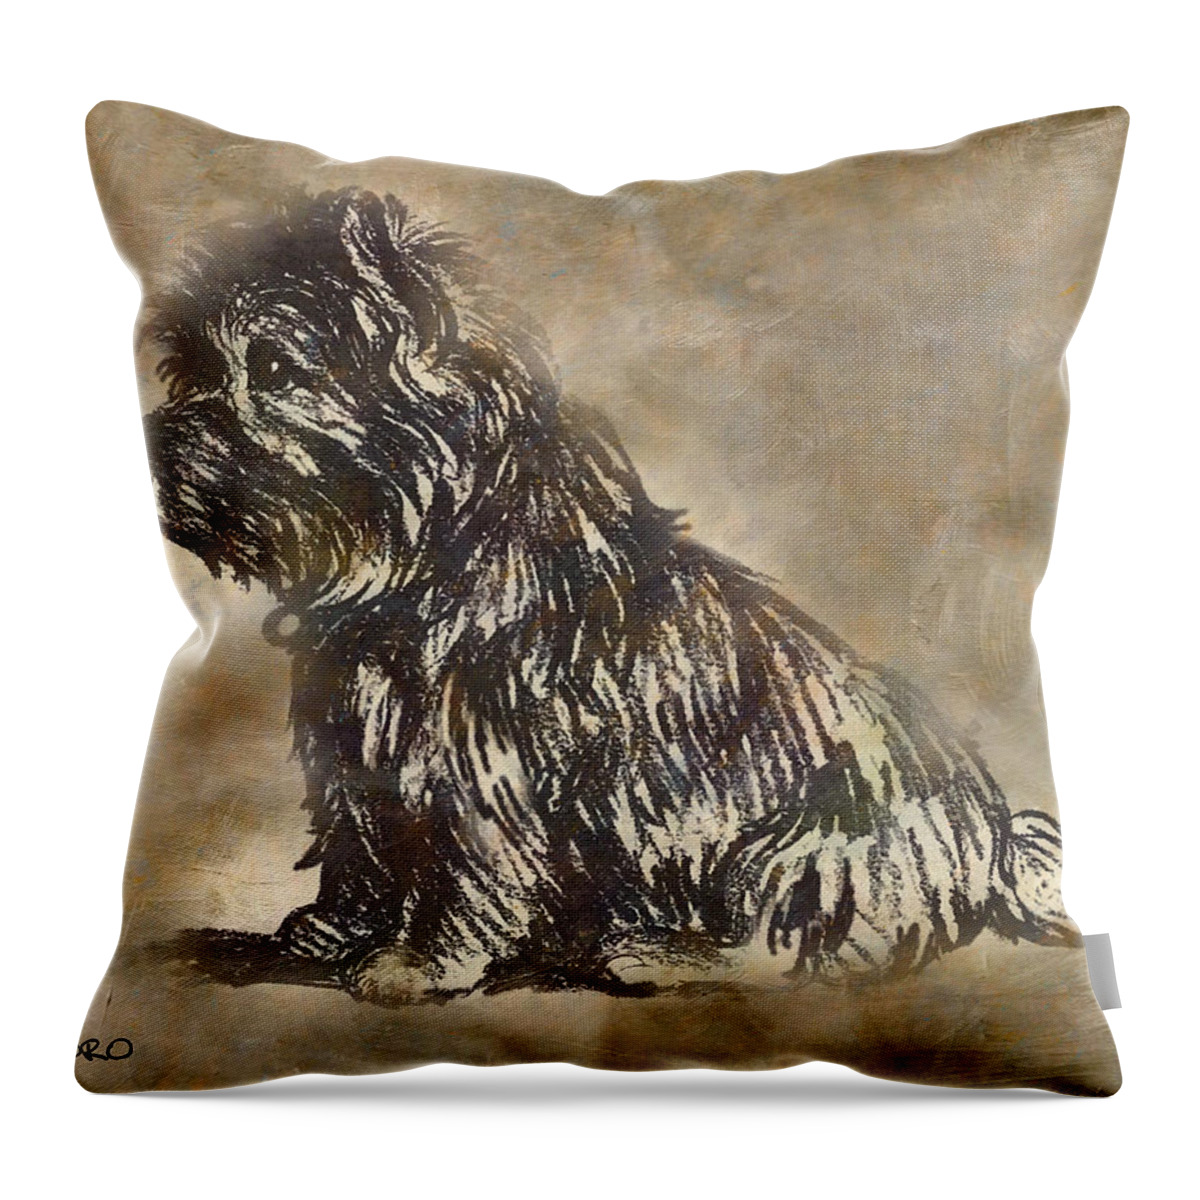 Scotty Throw Pillow featuring the painting Scotty Dog by George Pedro